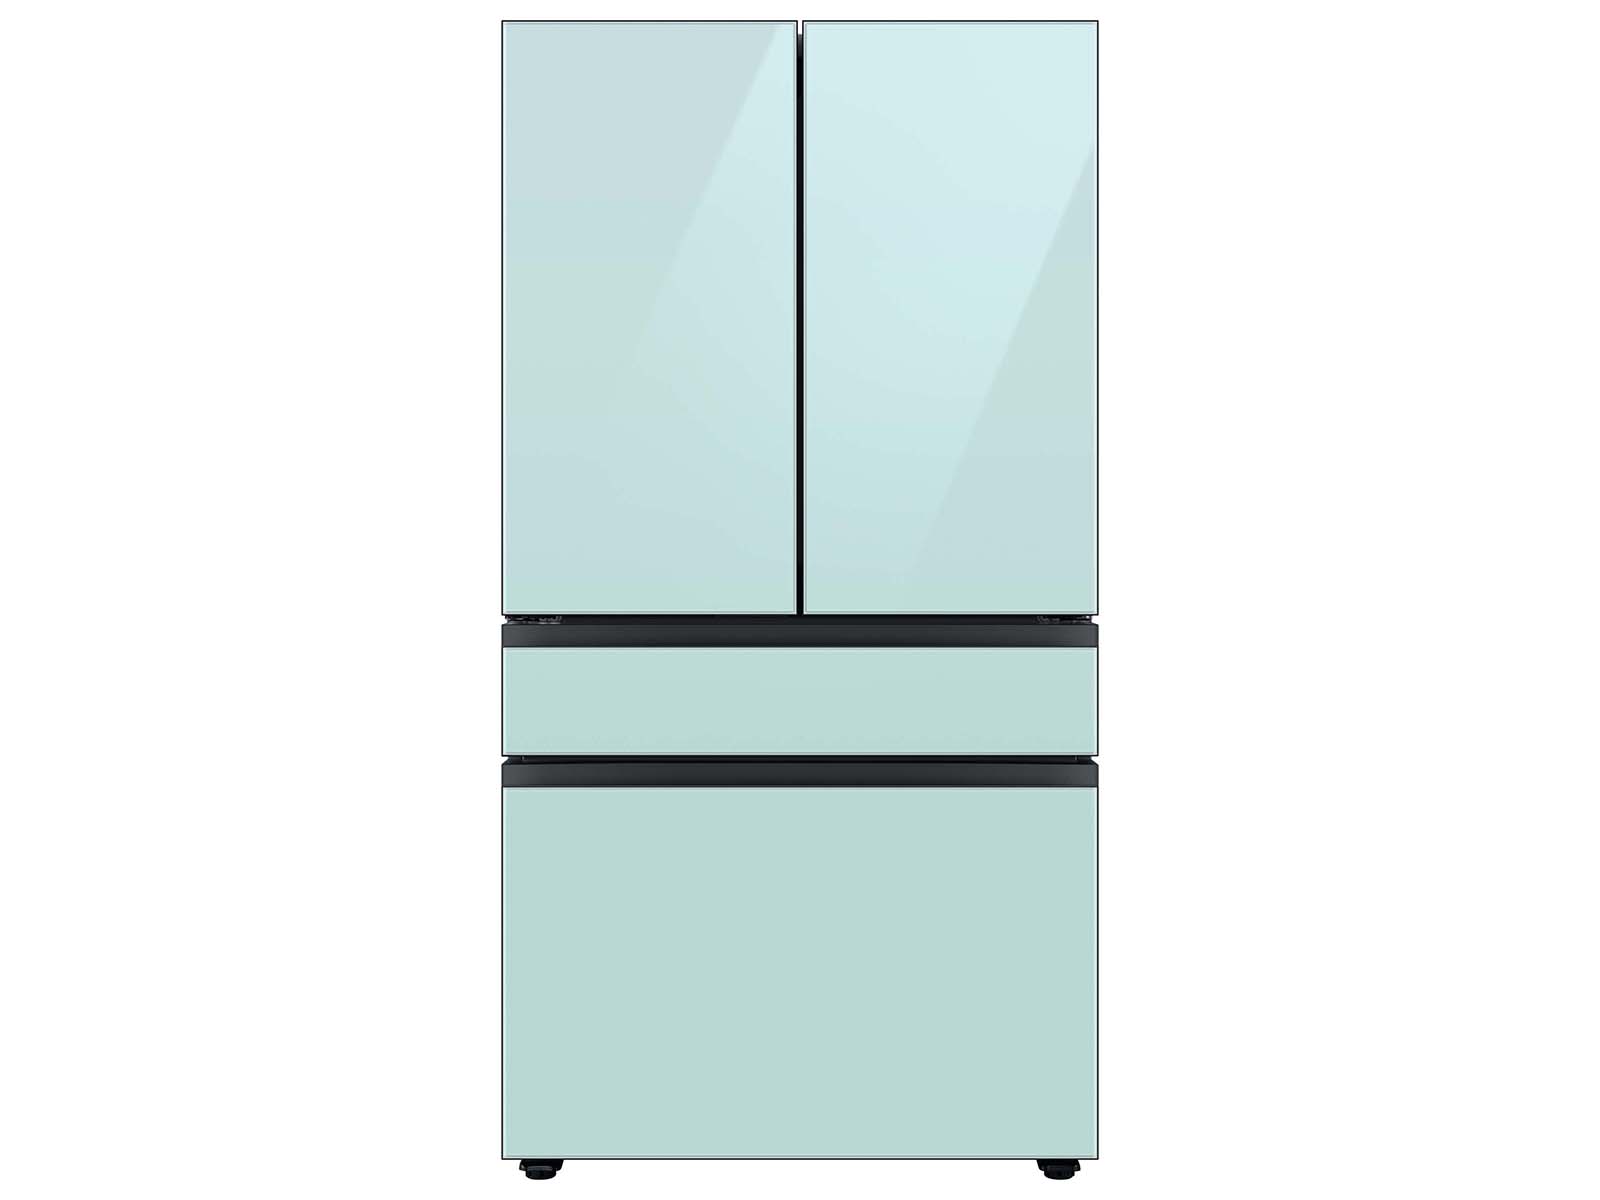 Samsung Bespoke 4-Door French Door Refrigerator in White Glass (23 cu. ft.) with Customizable Door Panel Colors and Beverage Center™ in Morning Blue Glass